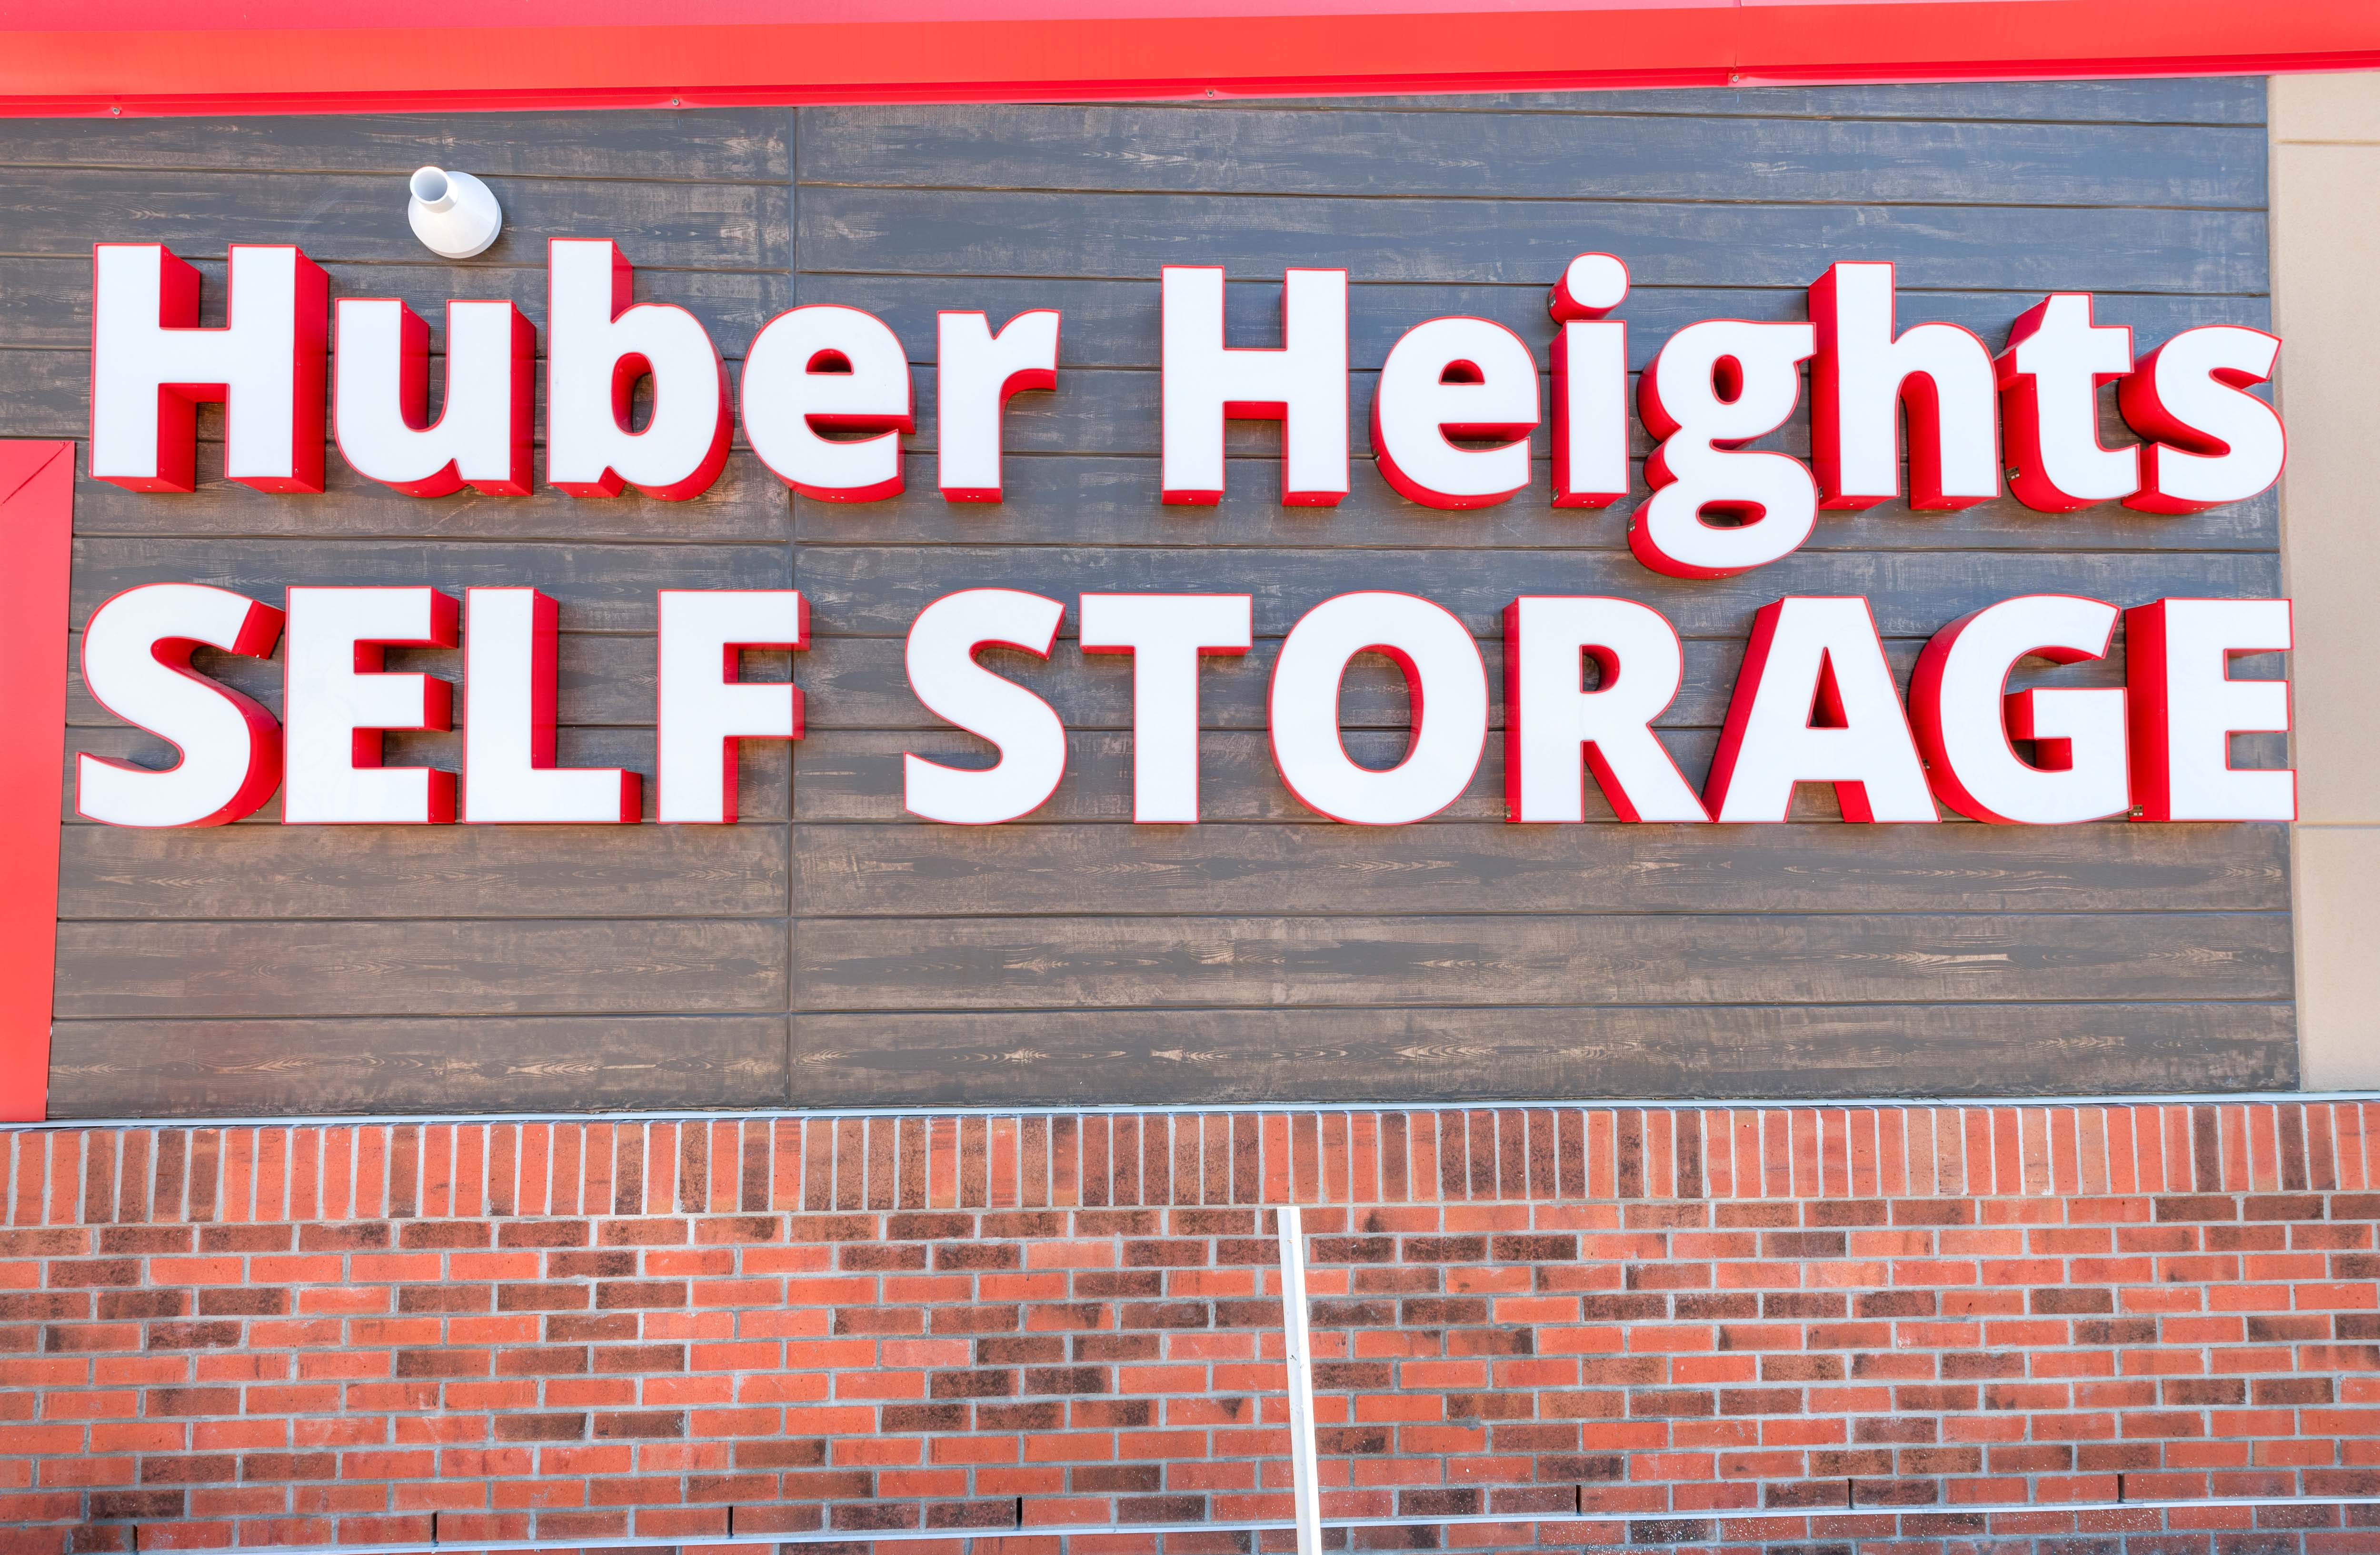 Huber Heights Self Storage in Huber Heights, OH